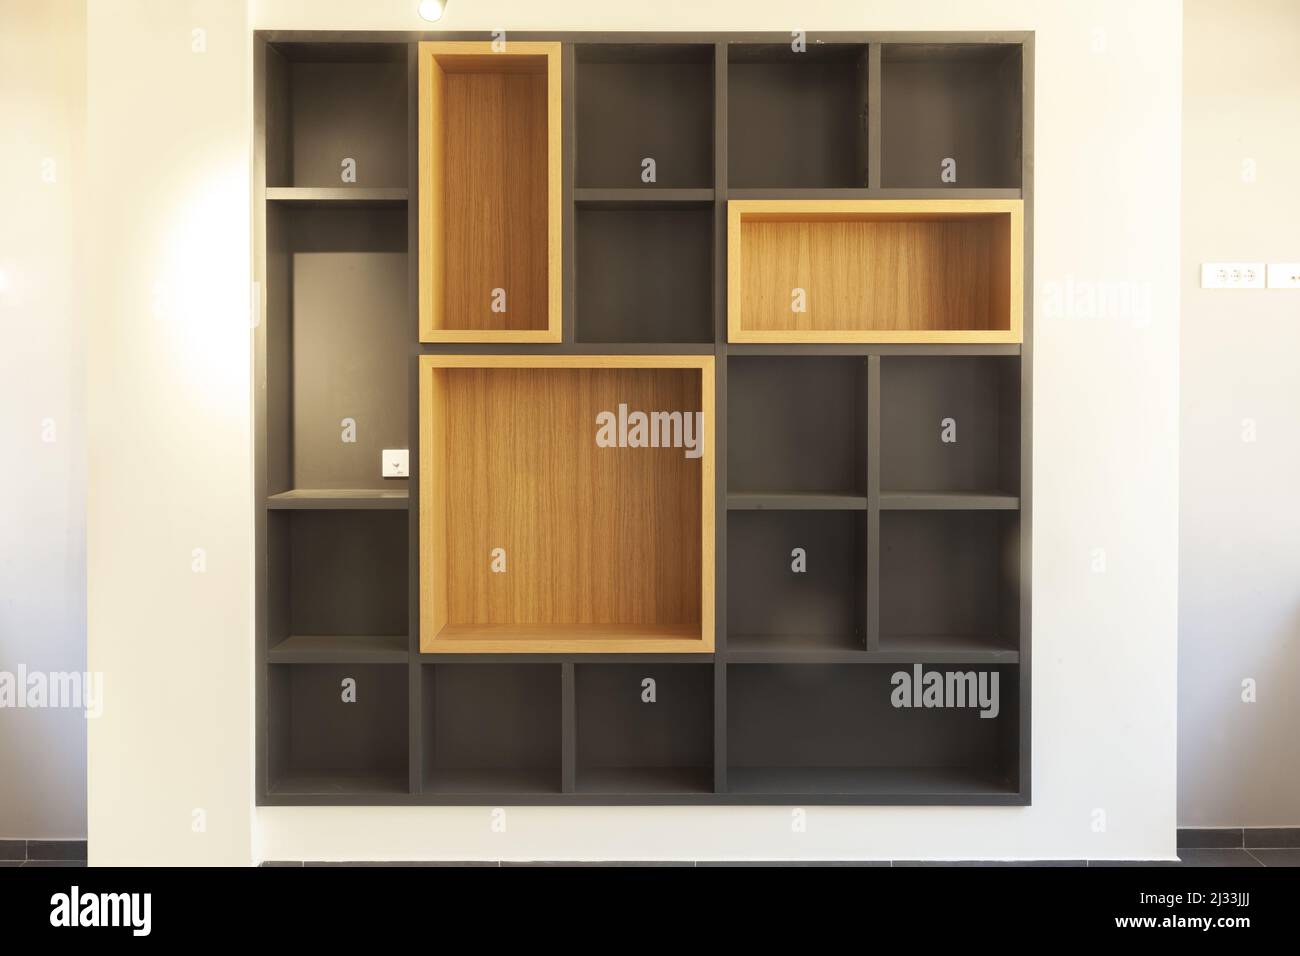 empty wooden shelves in the shape of cubes on the wall Stock Photo